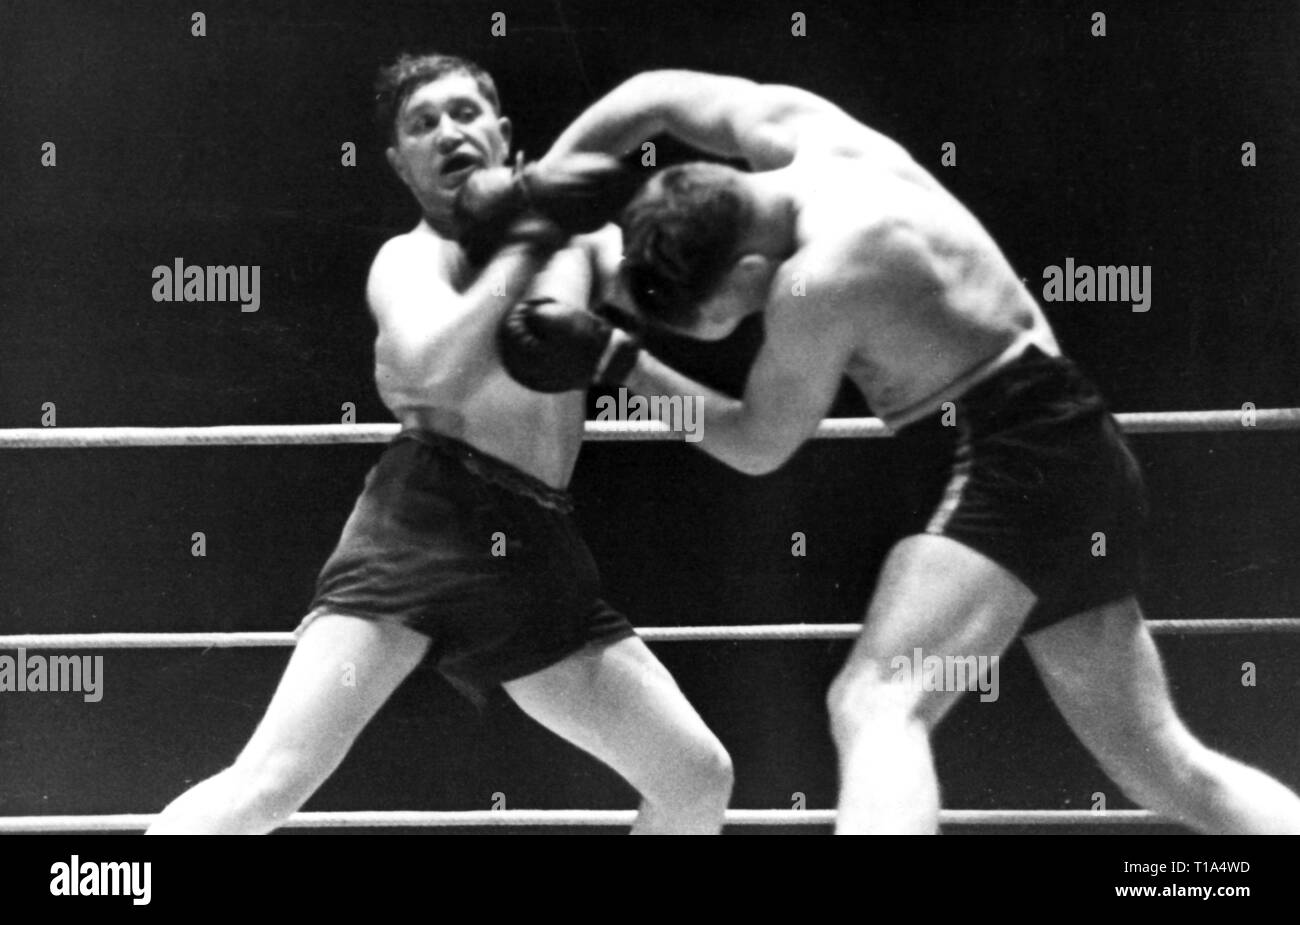 sports, boxing, tournament Netherlands against Denmark, boxing match Bakker (Netherlands) against Knud Christoffersen (Denmark), Copenhagen, 1946, Additional-Rights-Clearance-Info-Not-Available Stock Photo